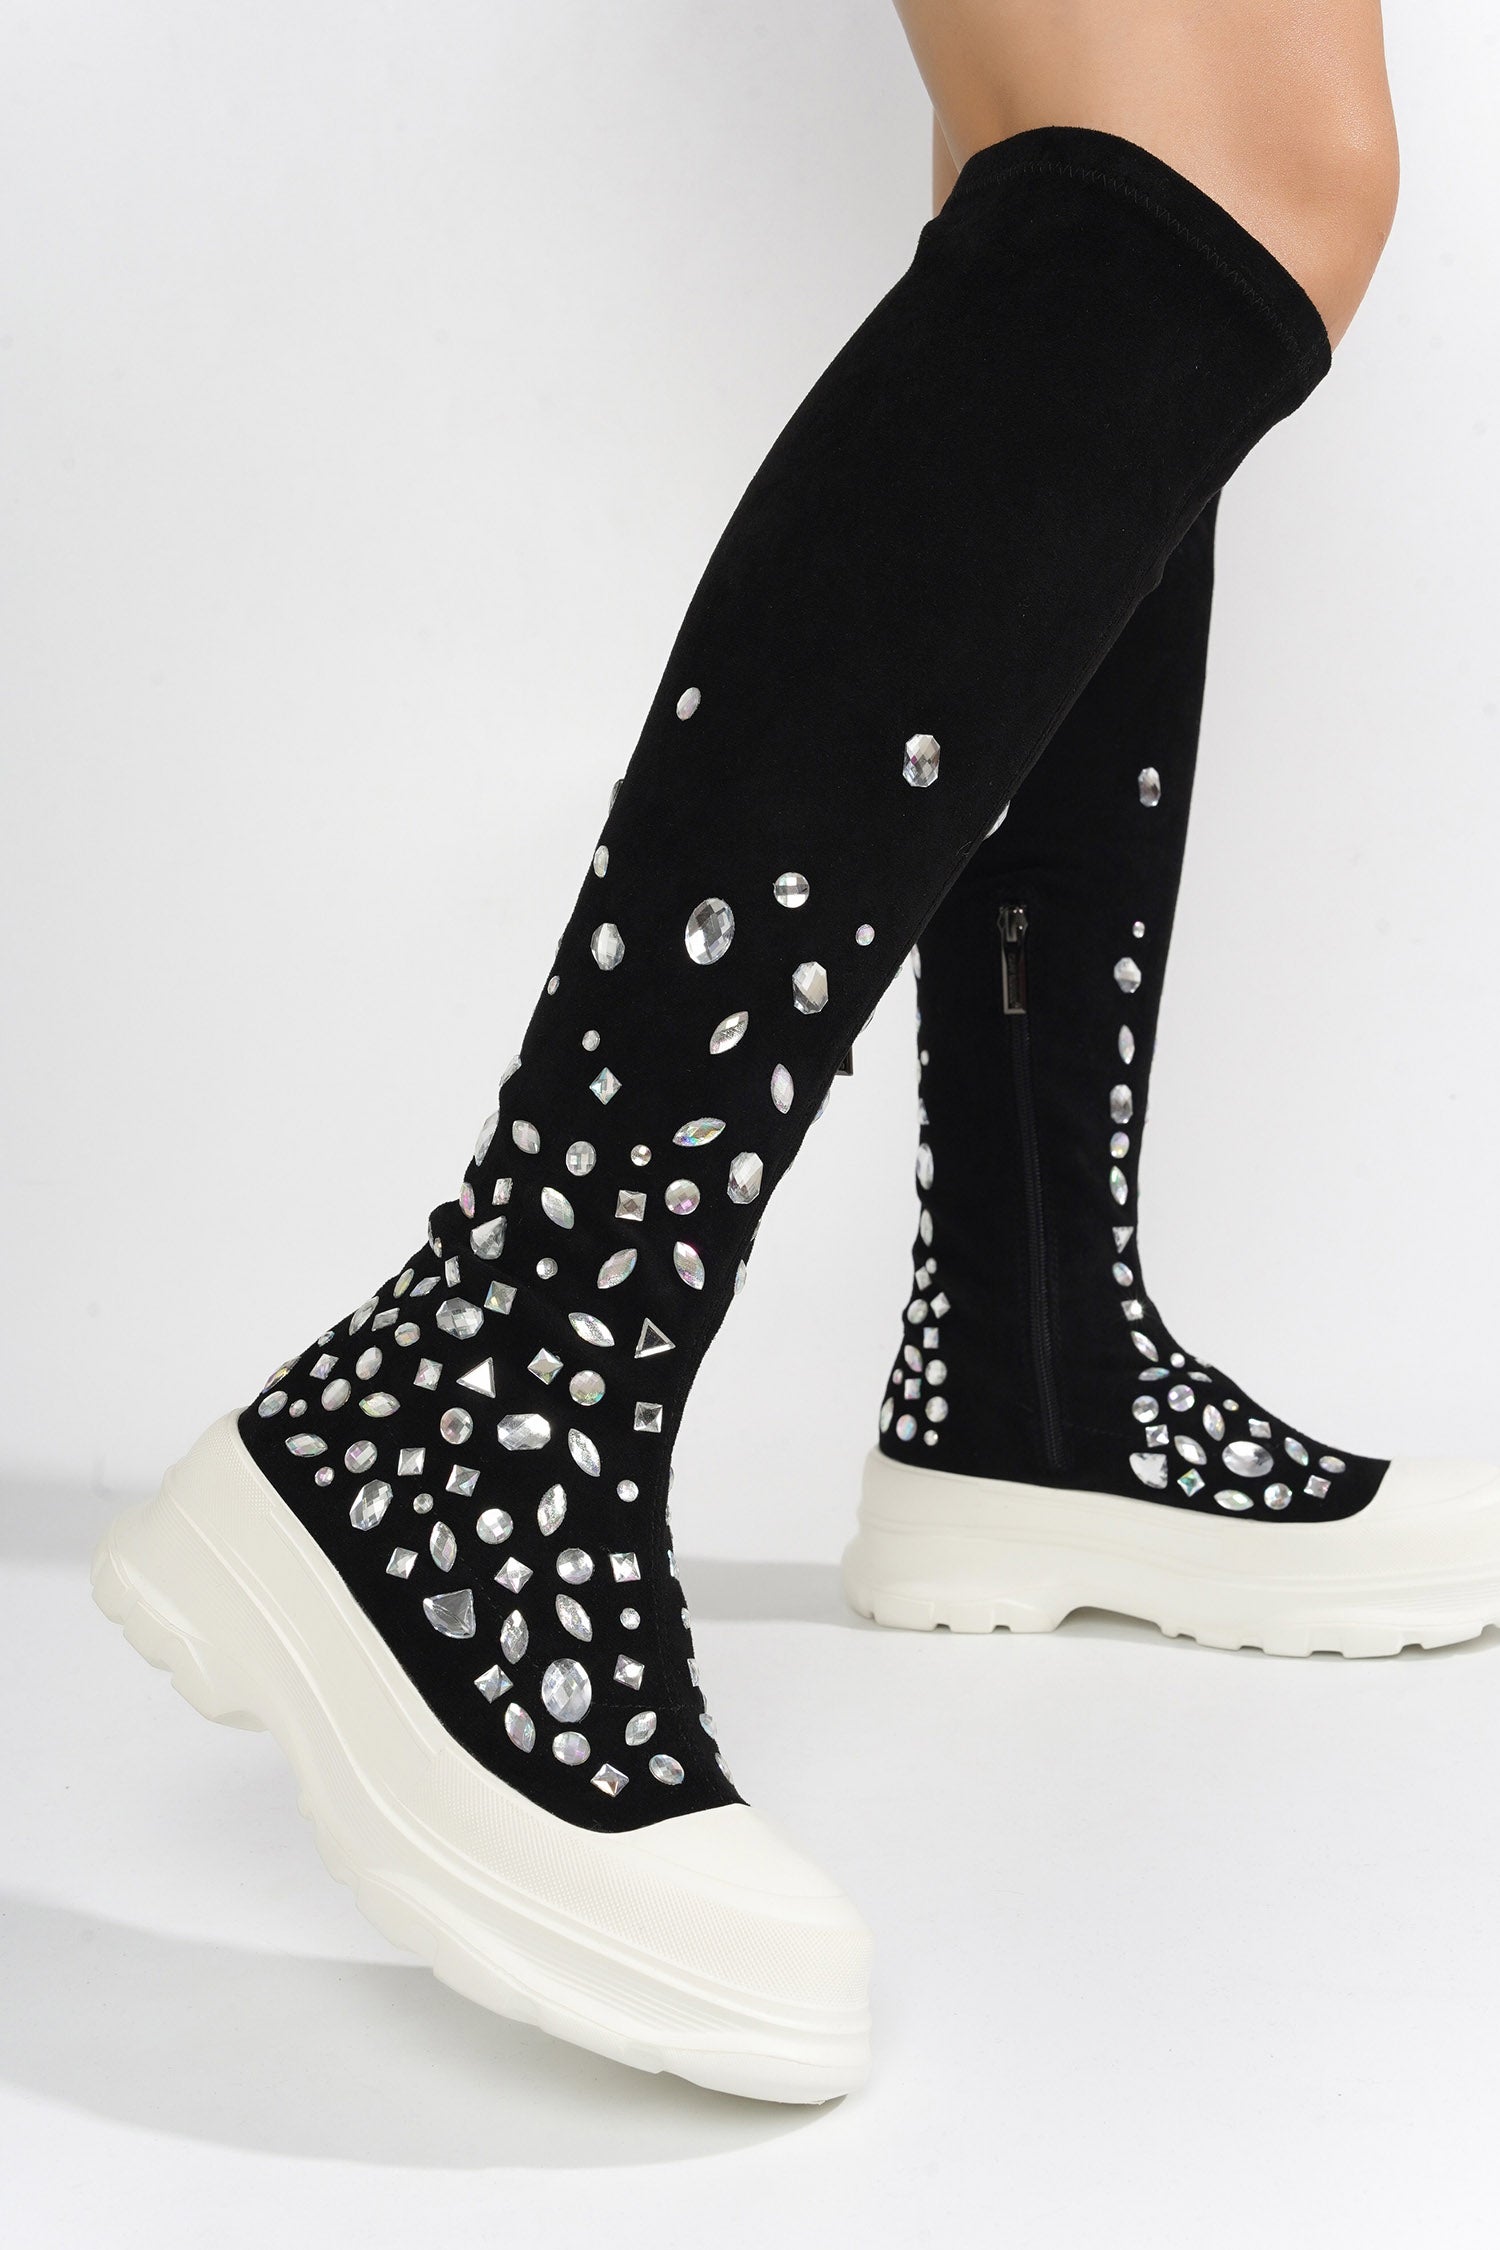 UrbanOG - Reesy Sock with Gems Thigh High Sneakers - SNEAKERS